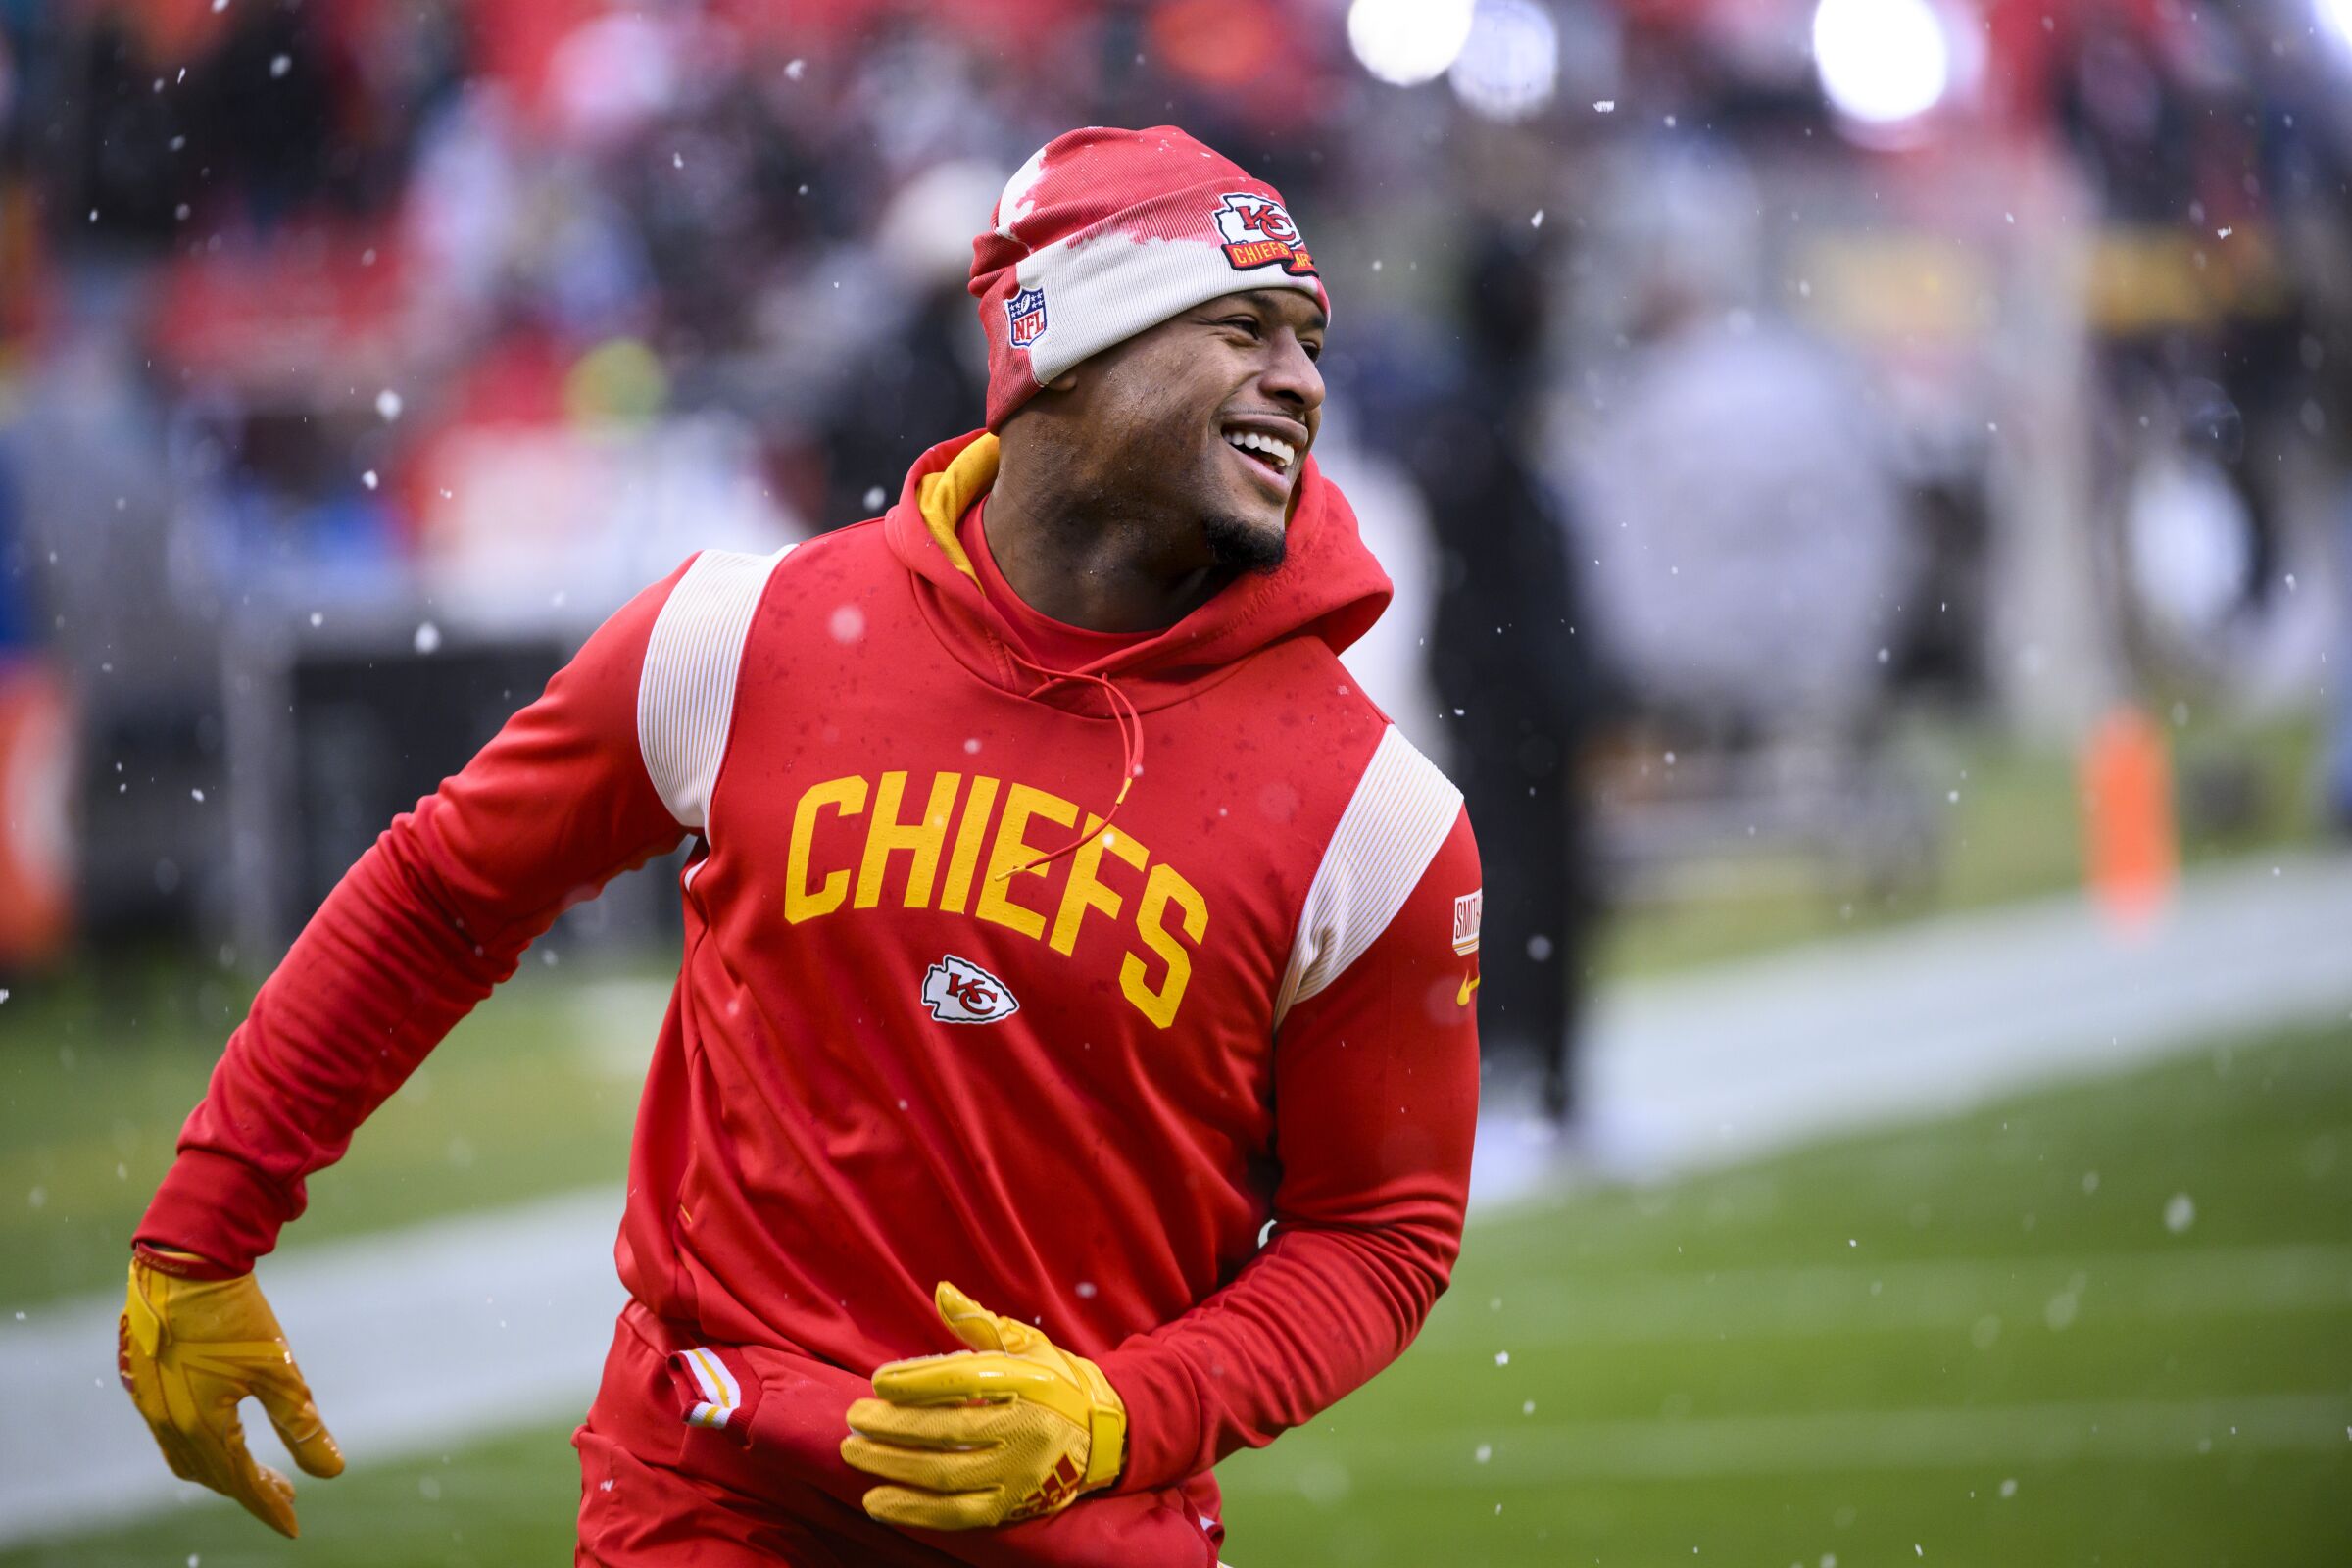 Kansas City Chiefs wide receiver JuJu Smith-Schuster laughs during warmups before a game.